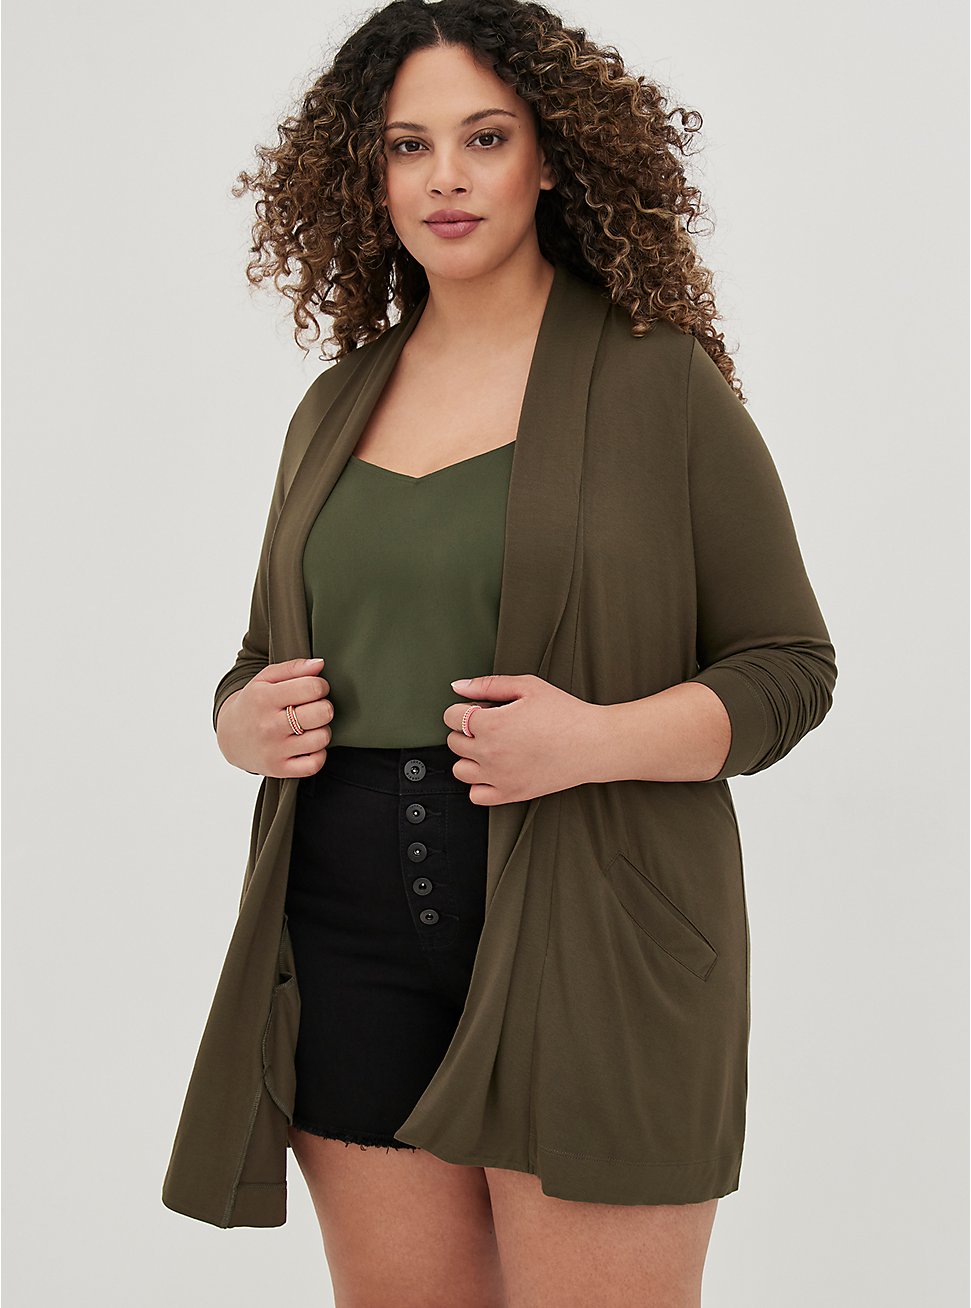 Tank Top And Cardigan For Apple Shape By torrid.com